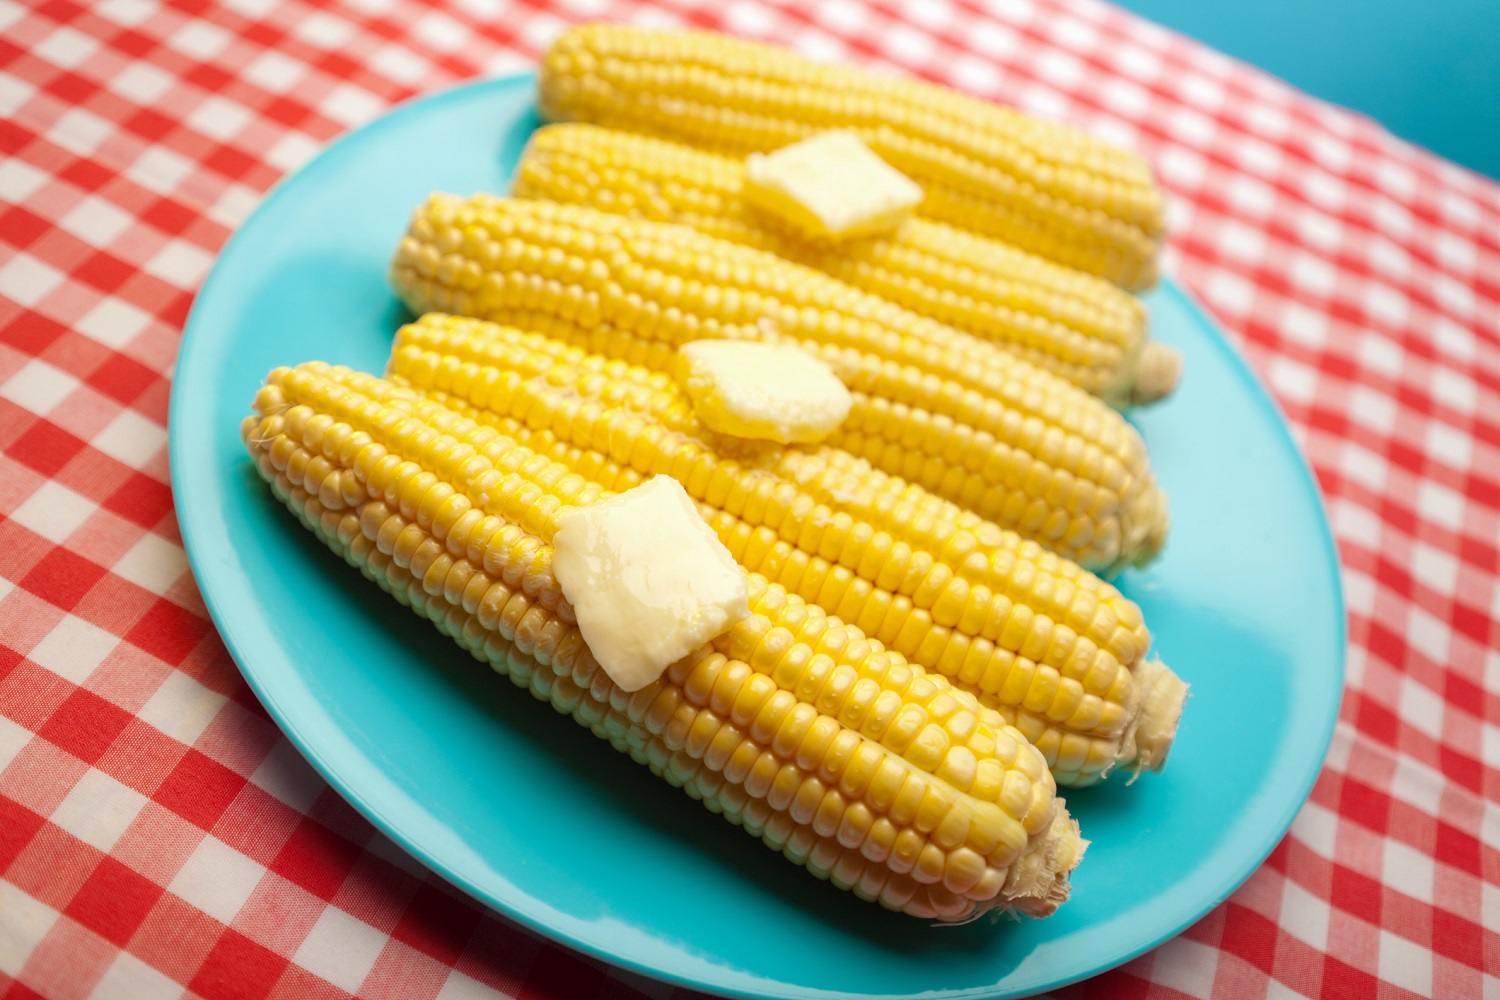 How to cook corn in the microwave, oven, or grill